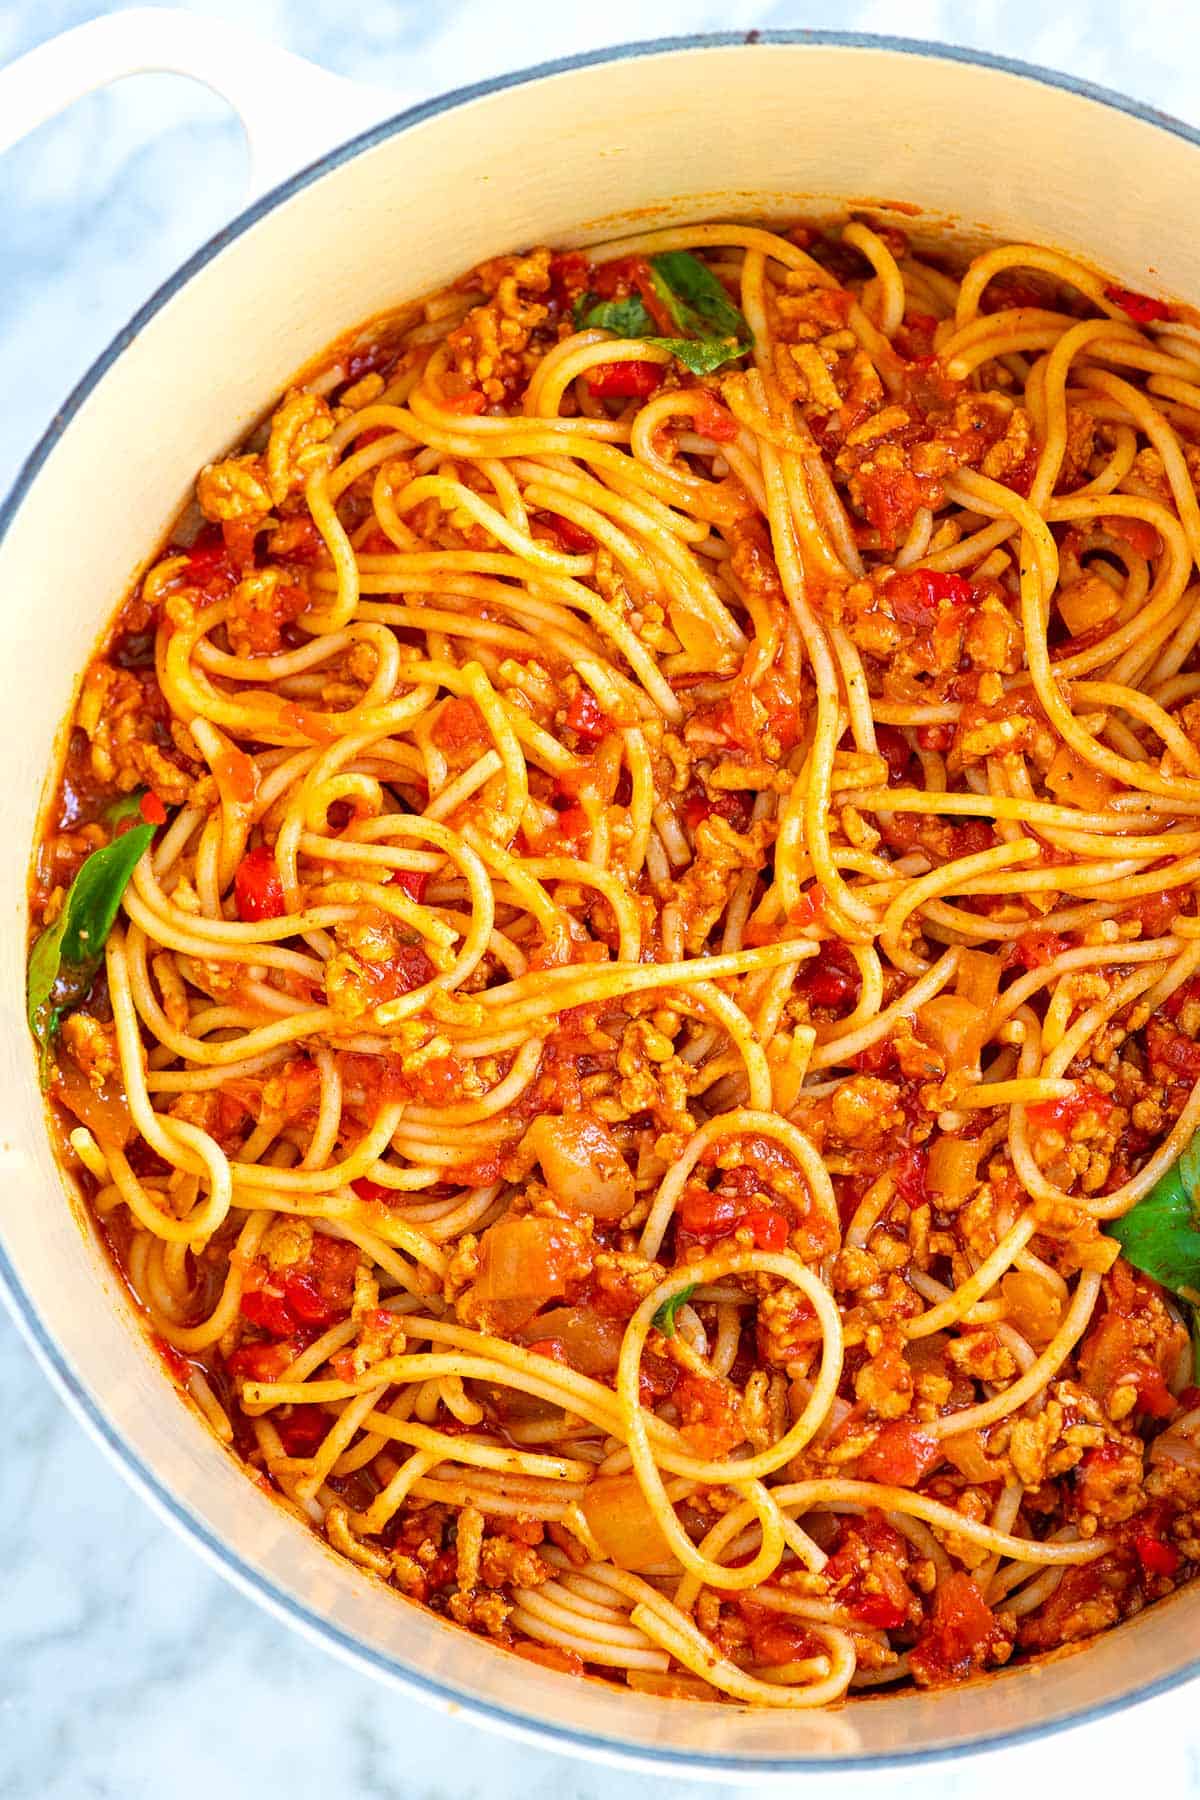 What Kind of Ground Beef Do You Use With Spaghetti - Serrano Humet2001